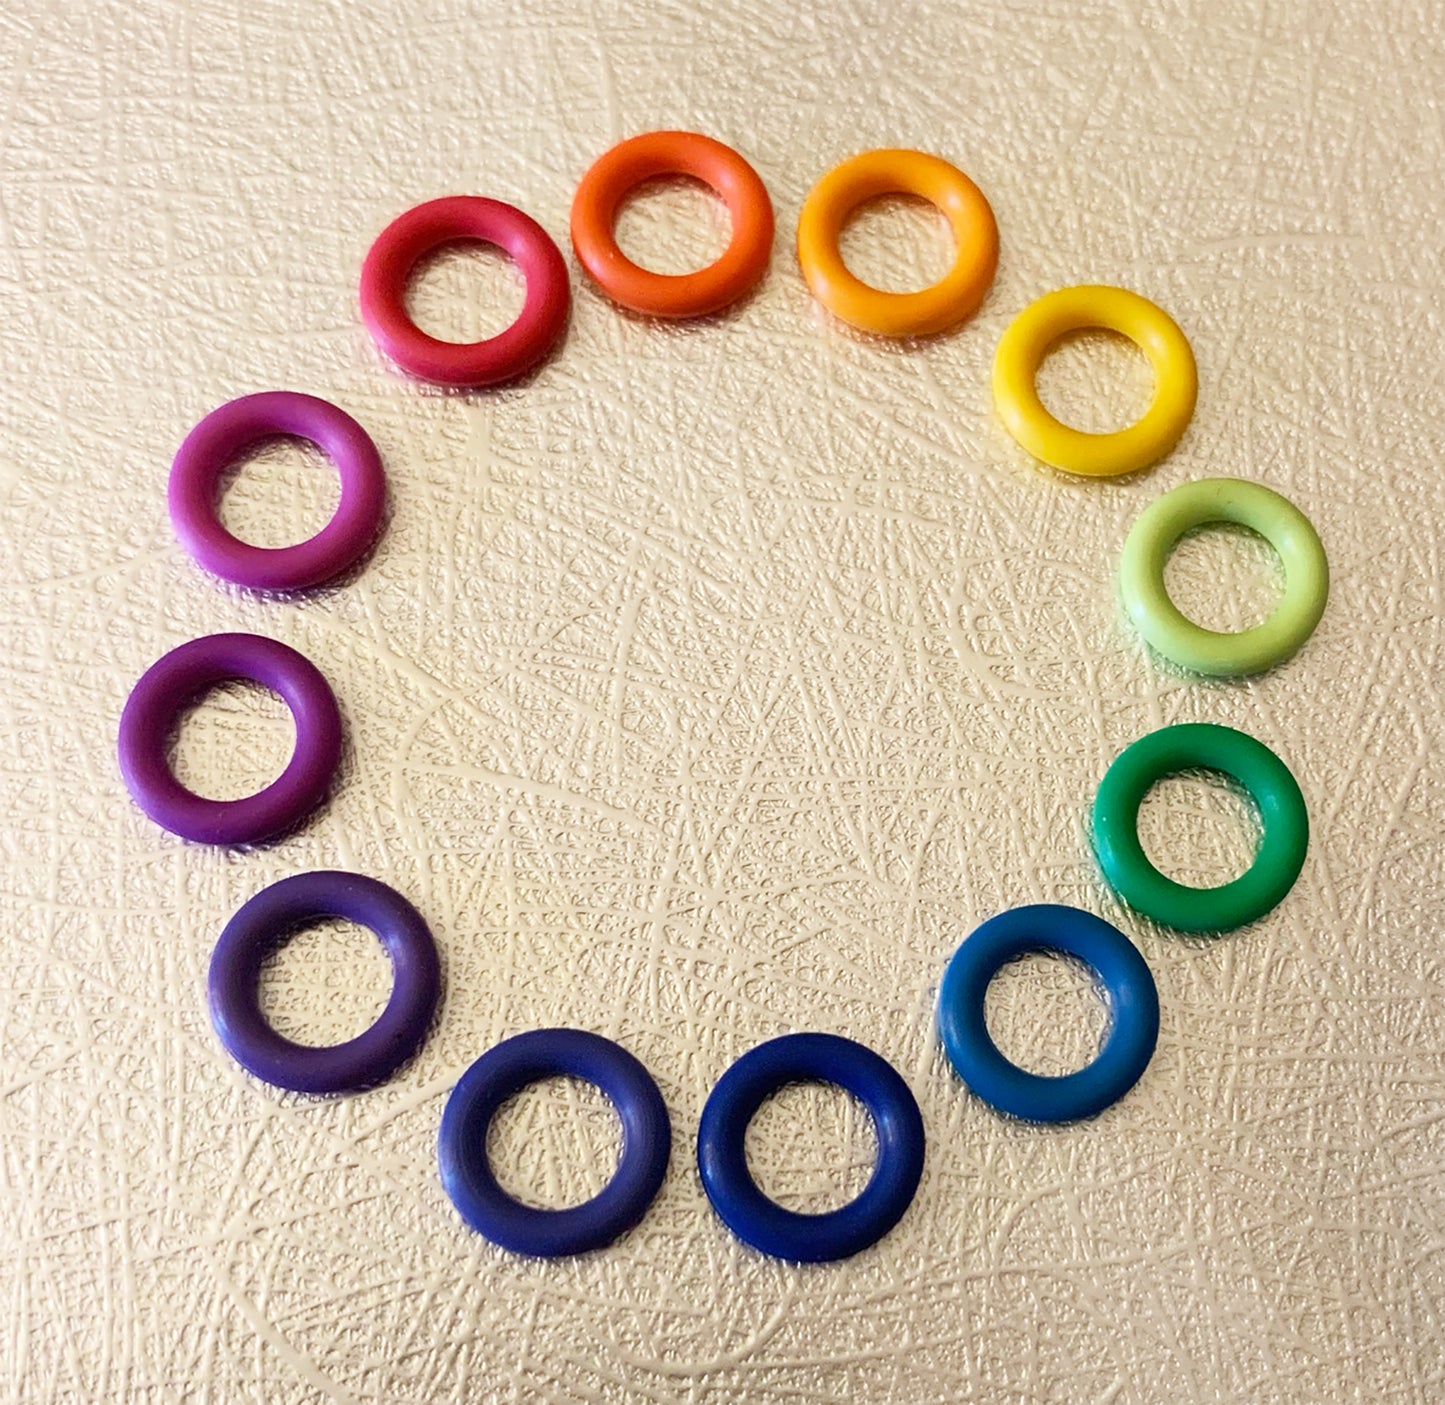 10mm EPDM Rubber O-Rings (ID: 6mm) - Hand Picked 12 Color Rainbow (4 of each color)